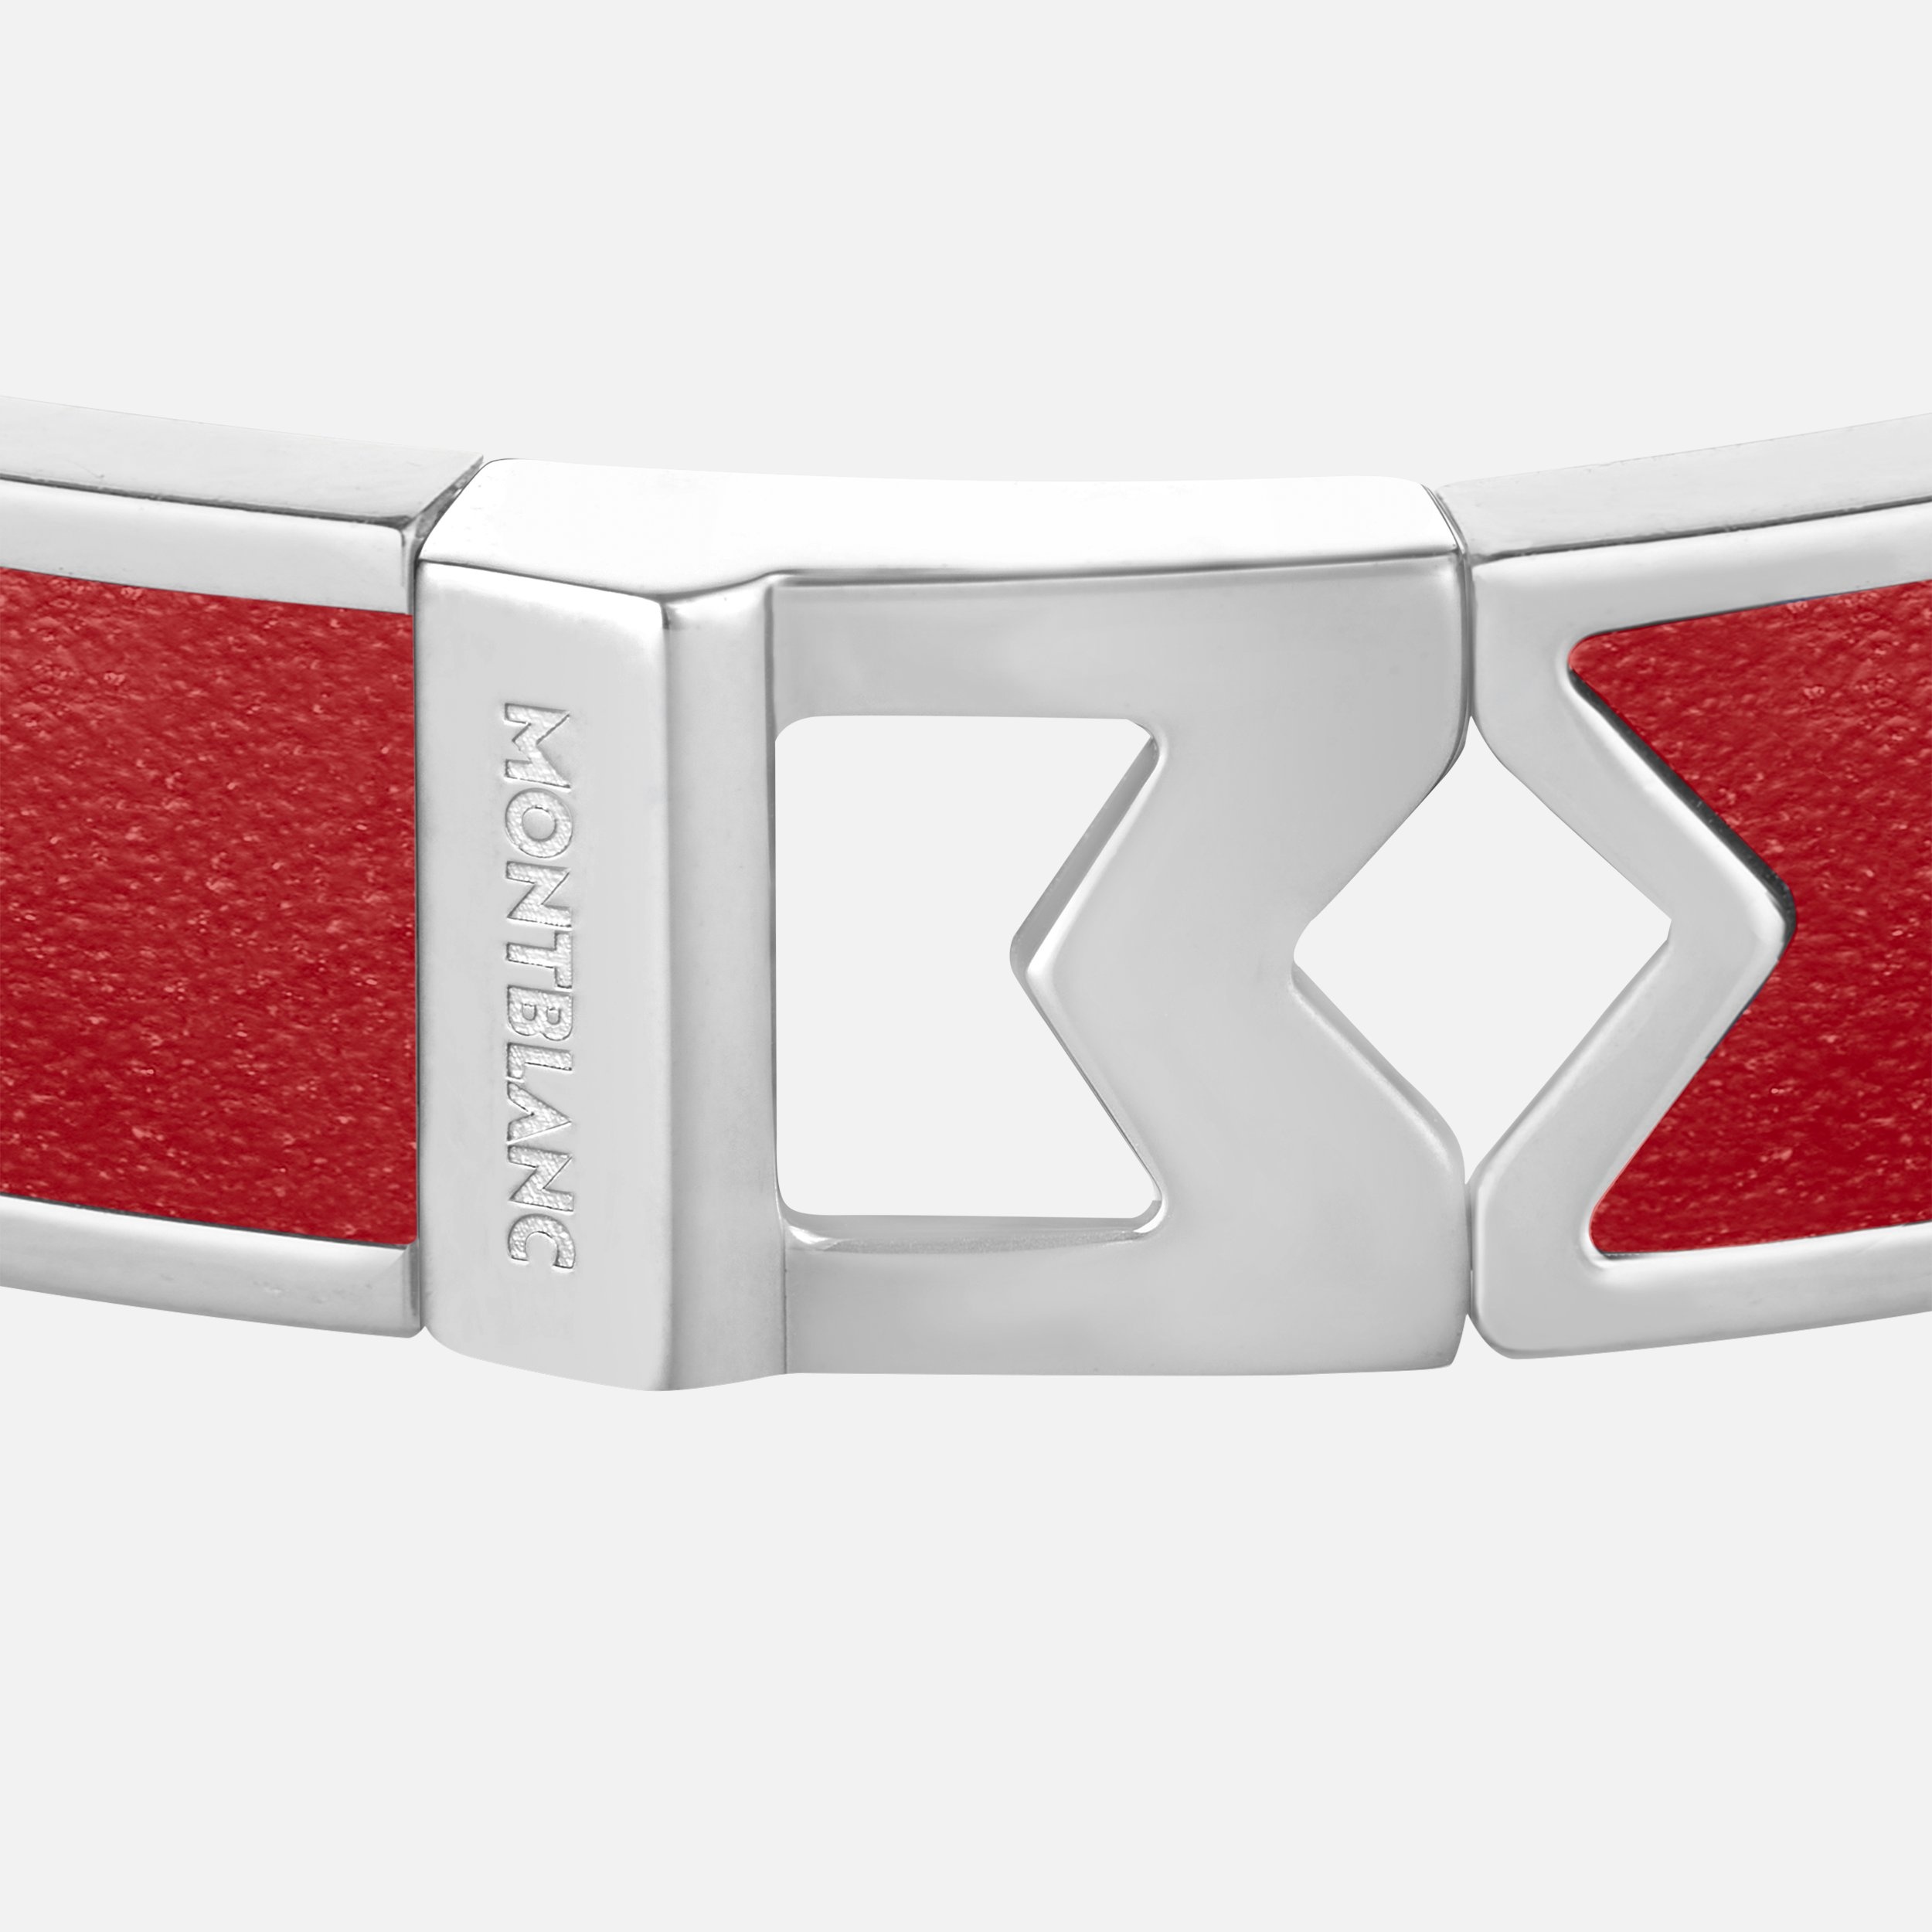 Bangle Steel Montblanc M logo Red leather - 2